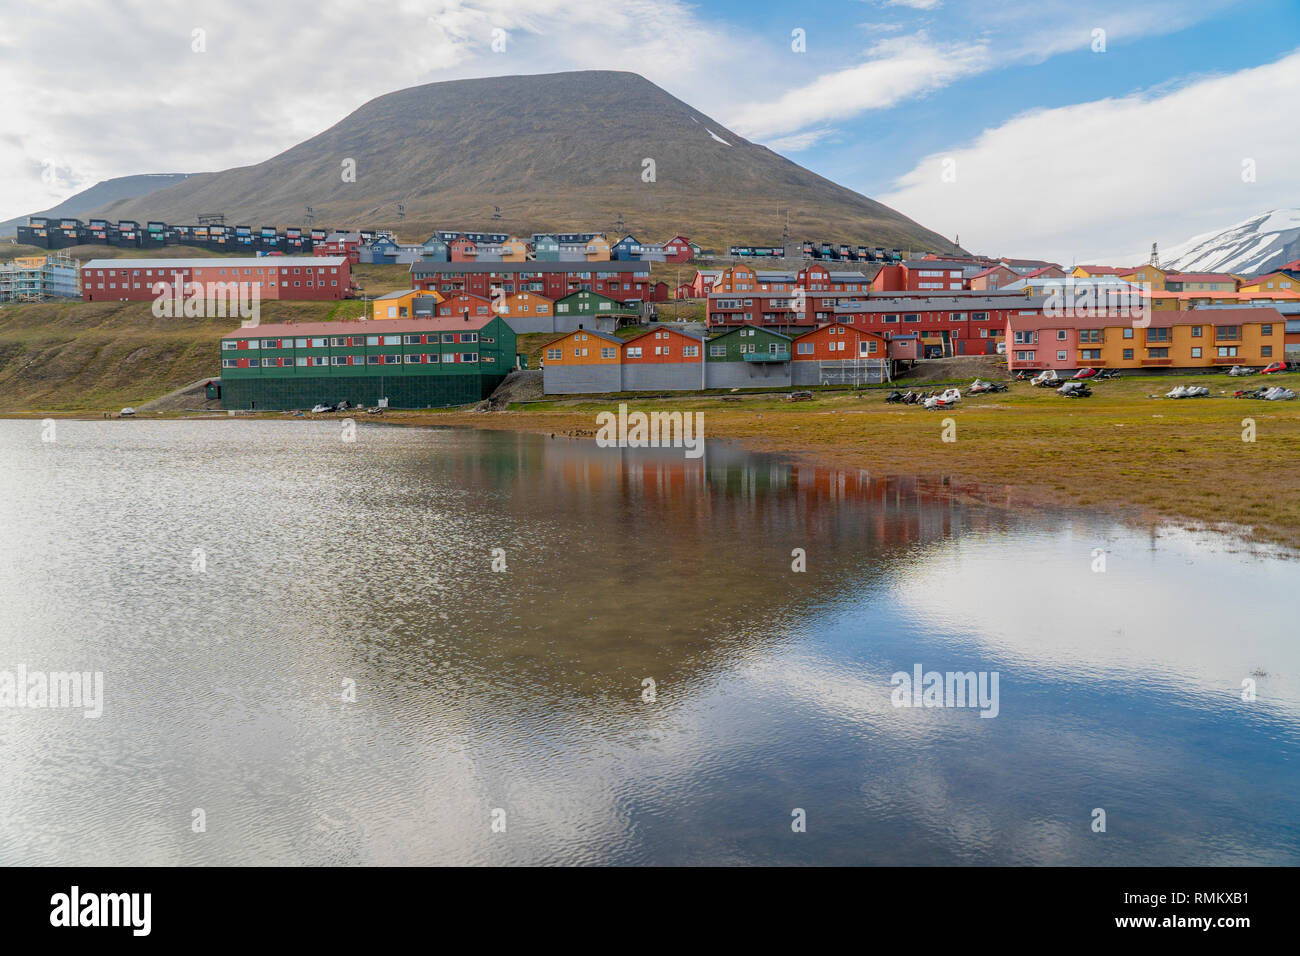 Longyearbyen (literally The Longyear Town) is the largest settlement and the administrative centre of Svalbard, Norway. Longyearbyen is located in the Stock Photo